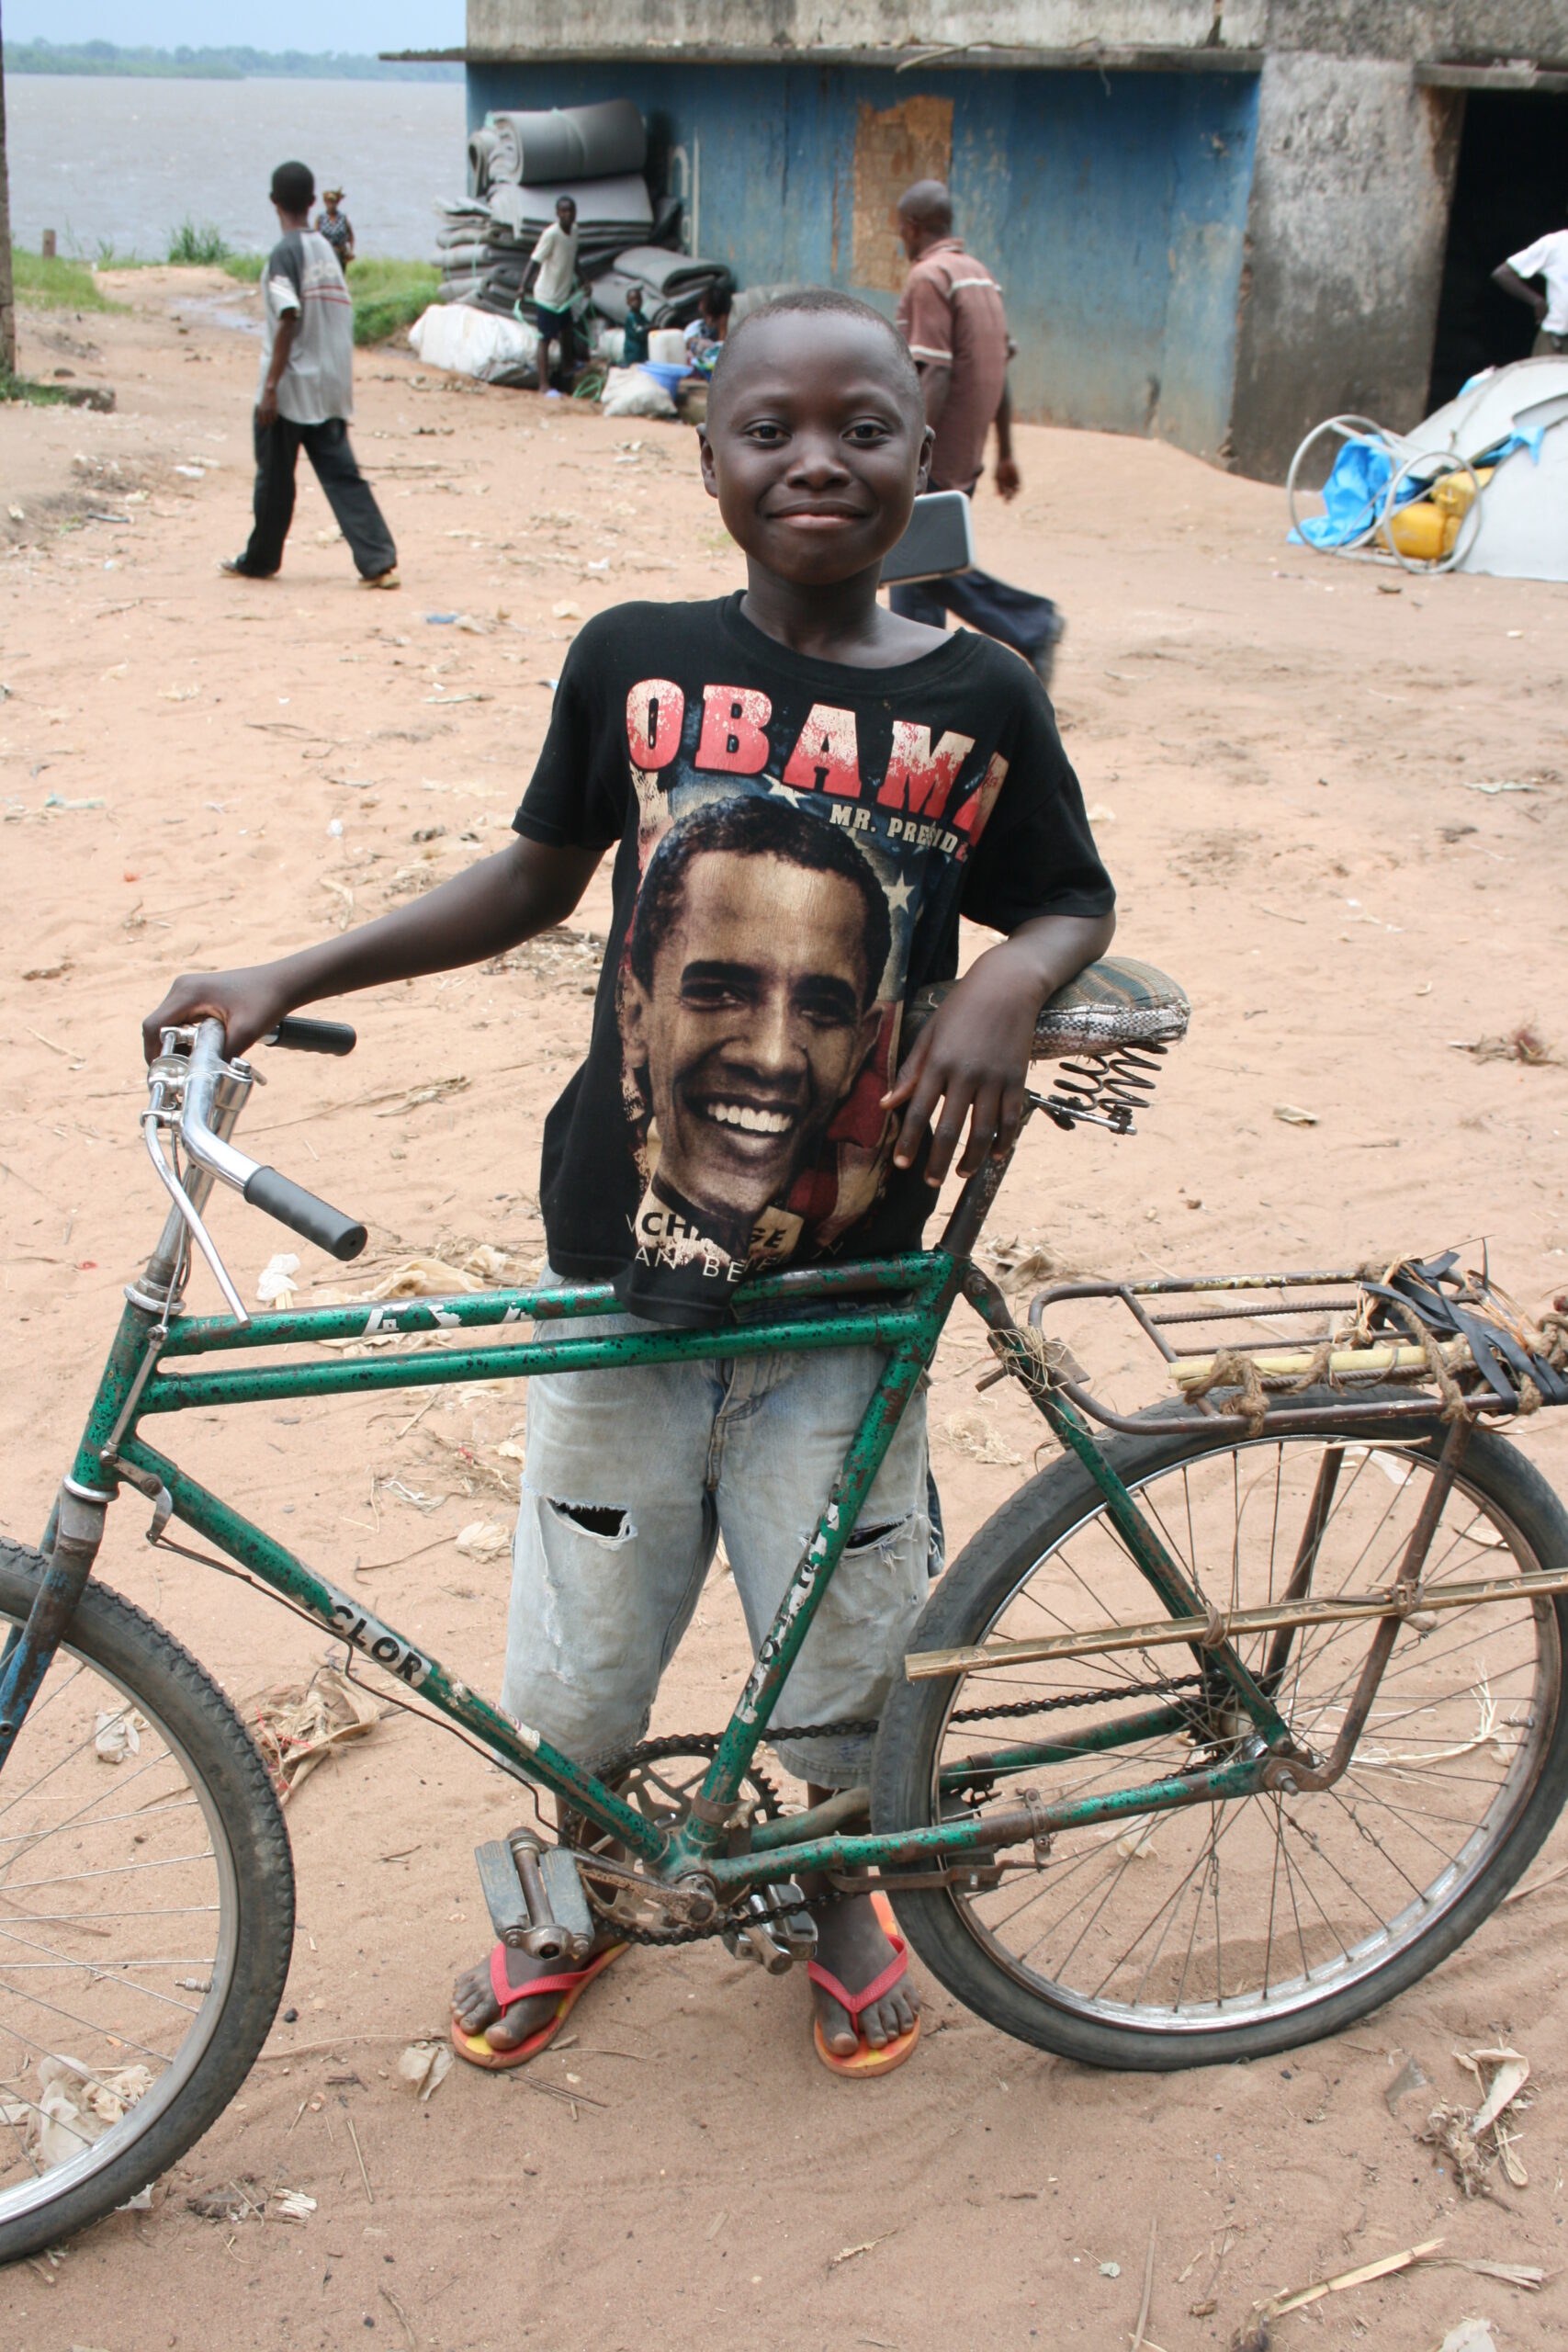 Child with Obama shirt and bicycle in Lisala